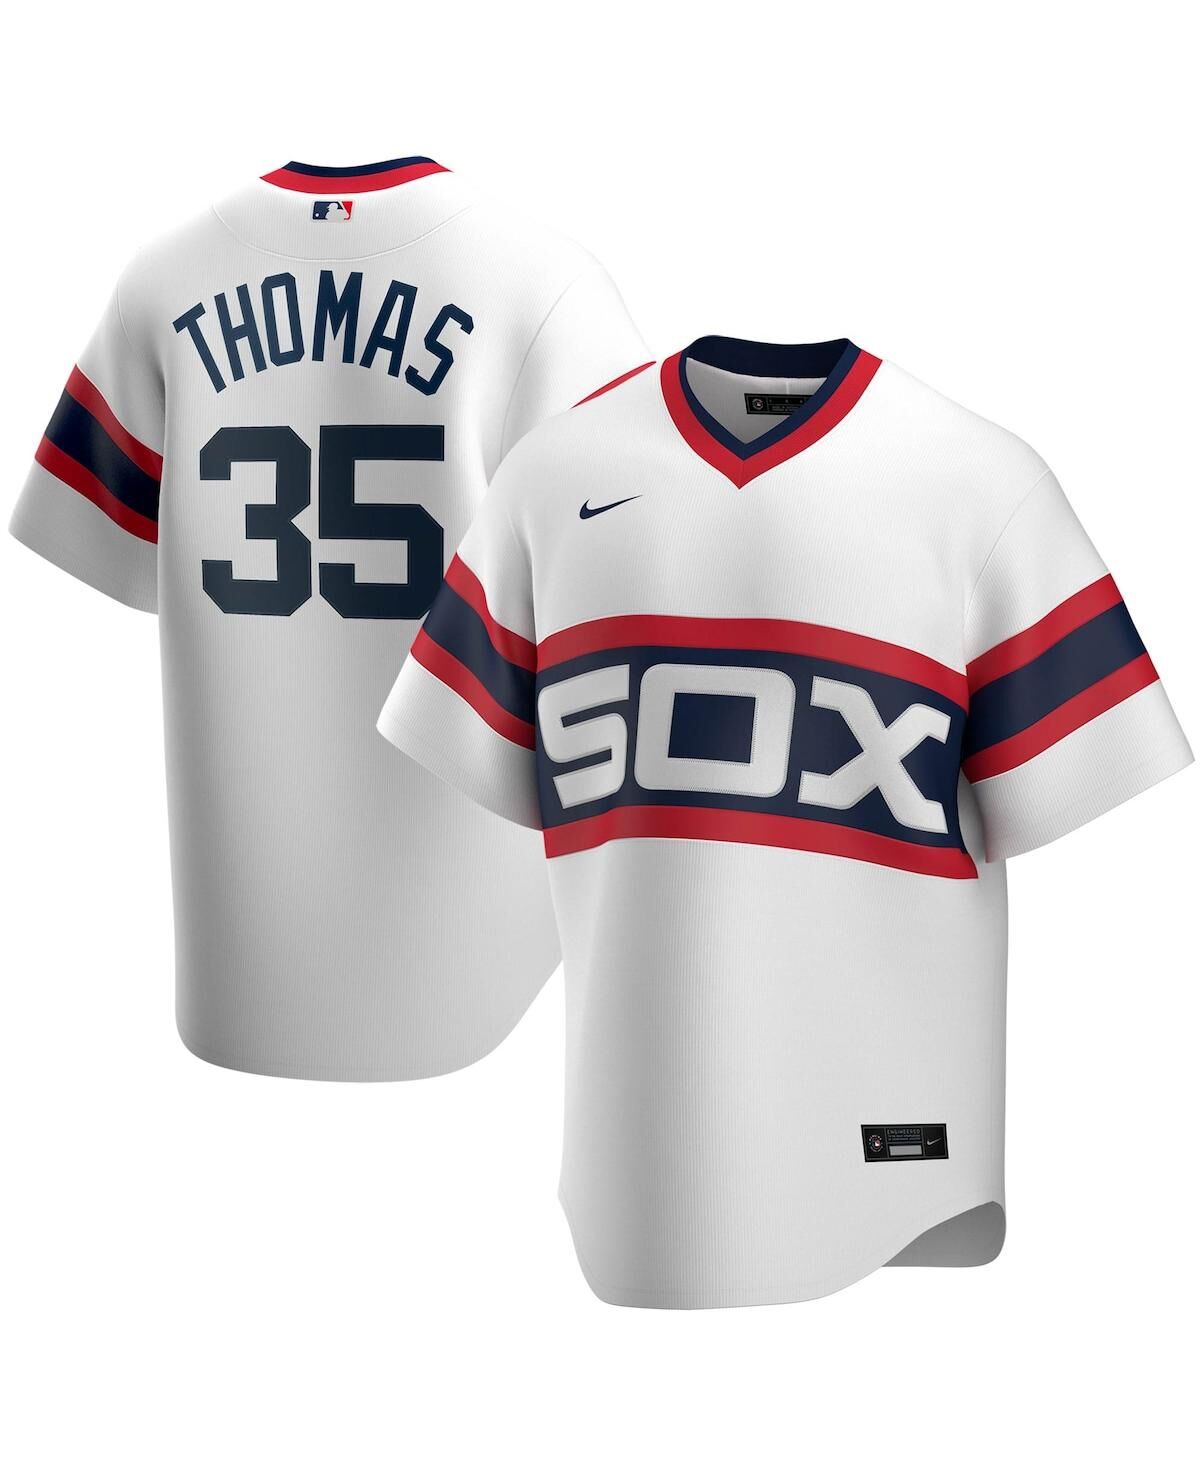 Nike Men's Nike Frank Thomas White Chicago White Sox Home Cooperstown Collection Player Jersey - White